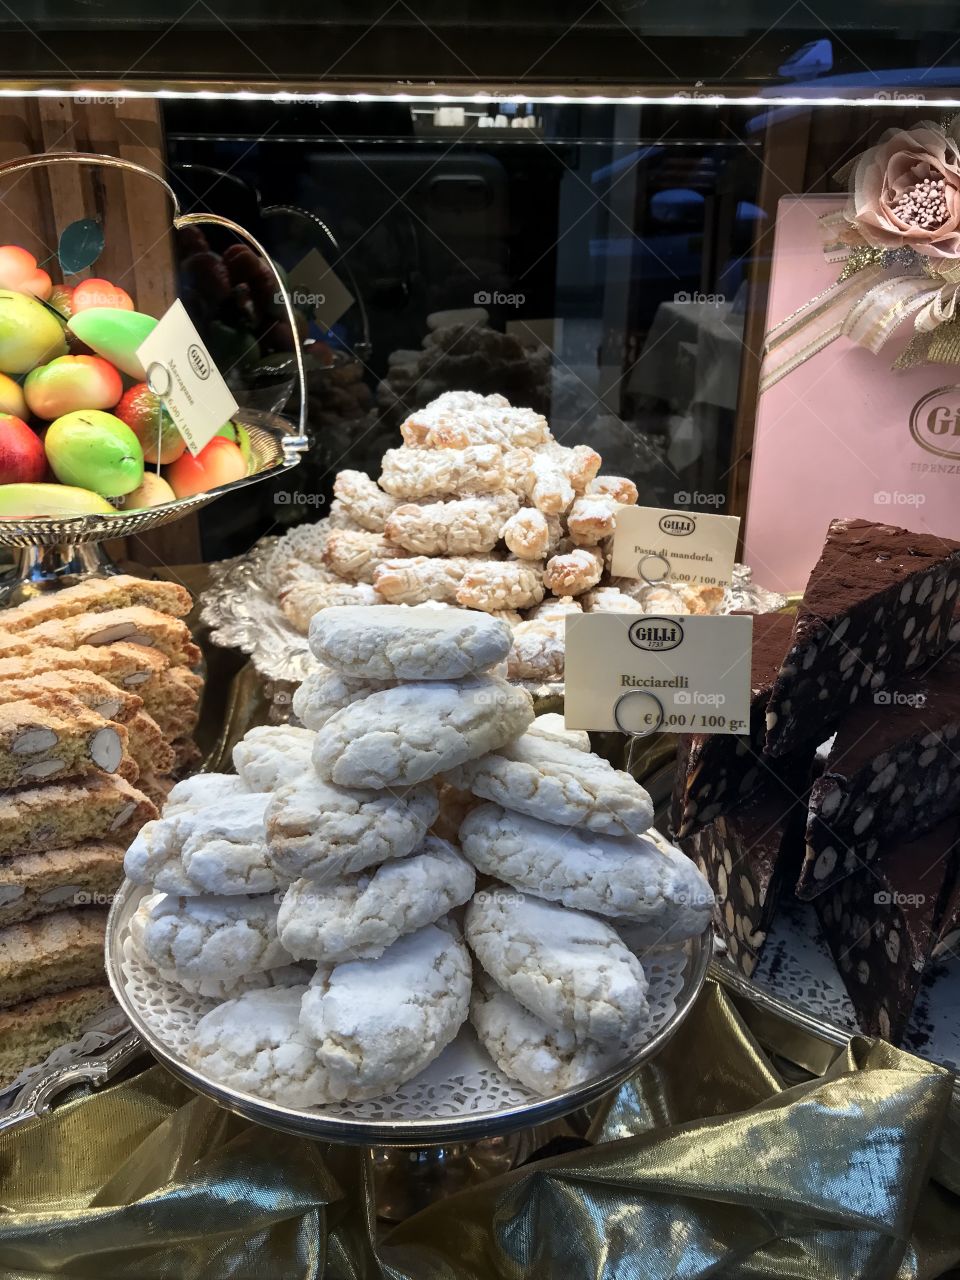 Desserts in Italy